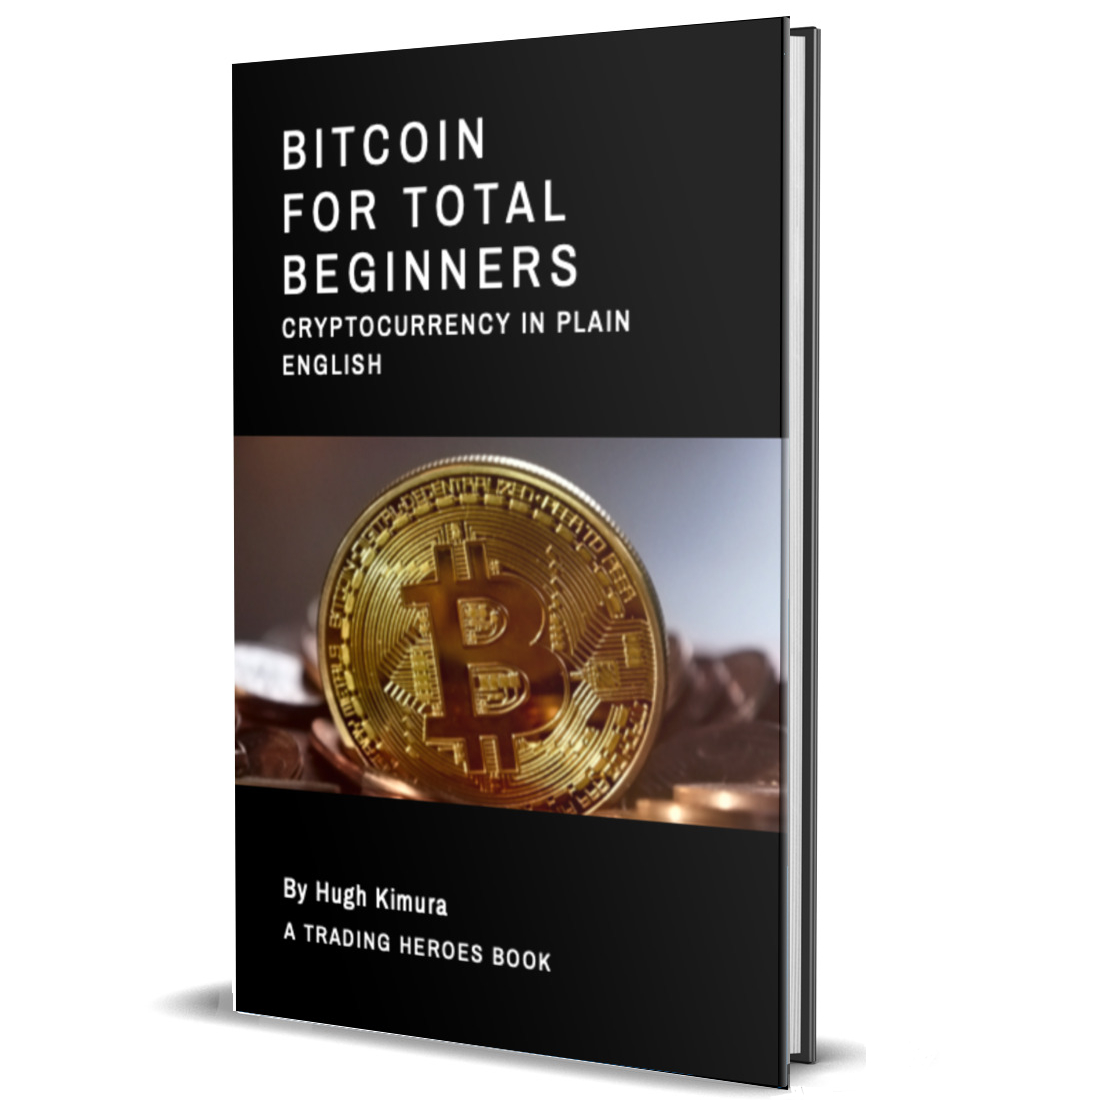 (PDF) Beginners' Guide to Own Bitcoin Cryptocurrency | Daria Andreeva - bitcoinhelp.fun